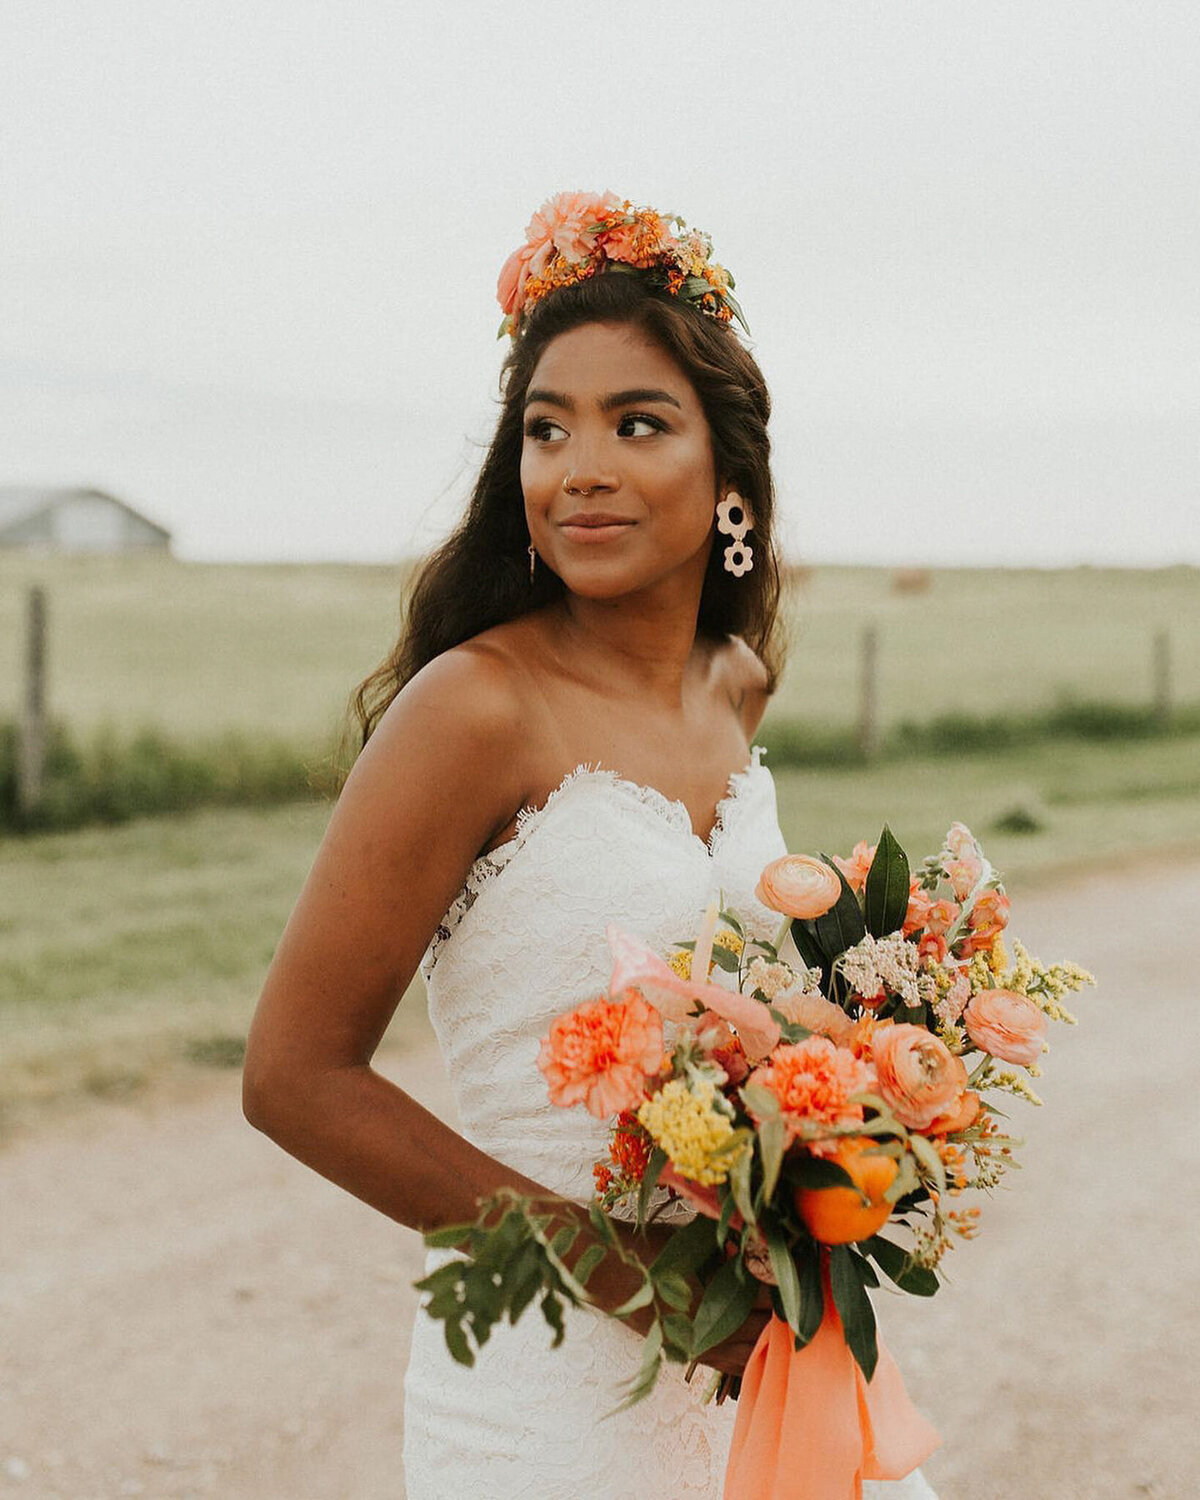 Stunning and colourful bridal portrait with hair and makeup by Madi Leigh Artistry, experienced and inclusive Calgary hair & makeup artist, featured on the Brontë Bride Vendor Guide.